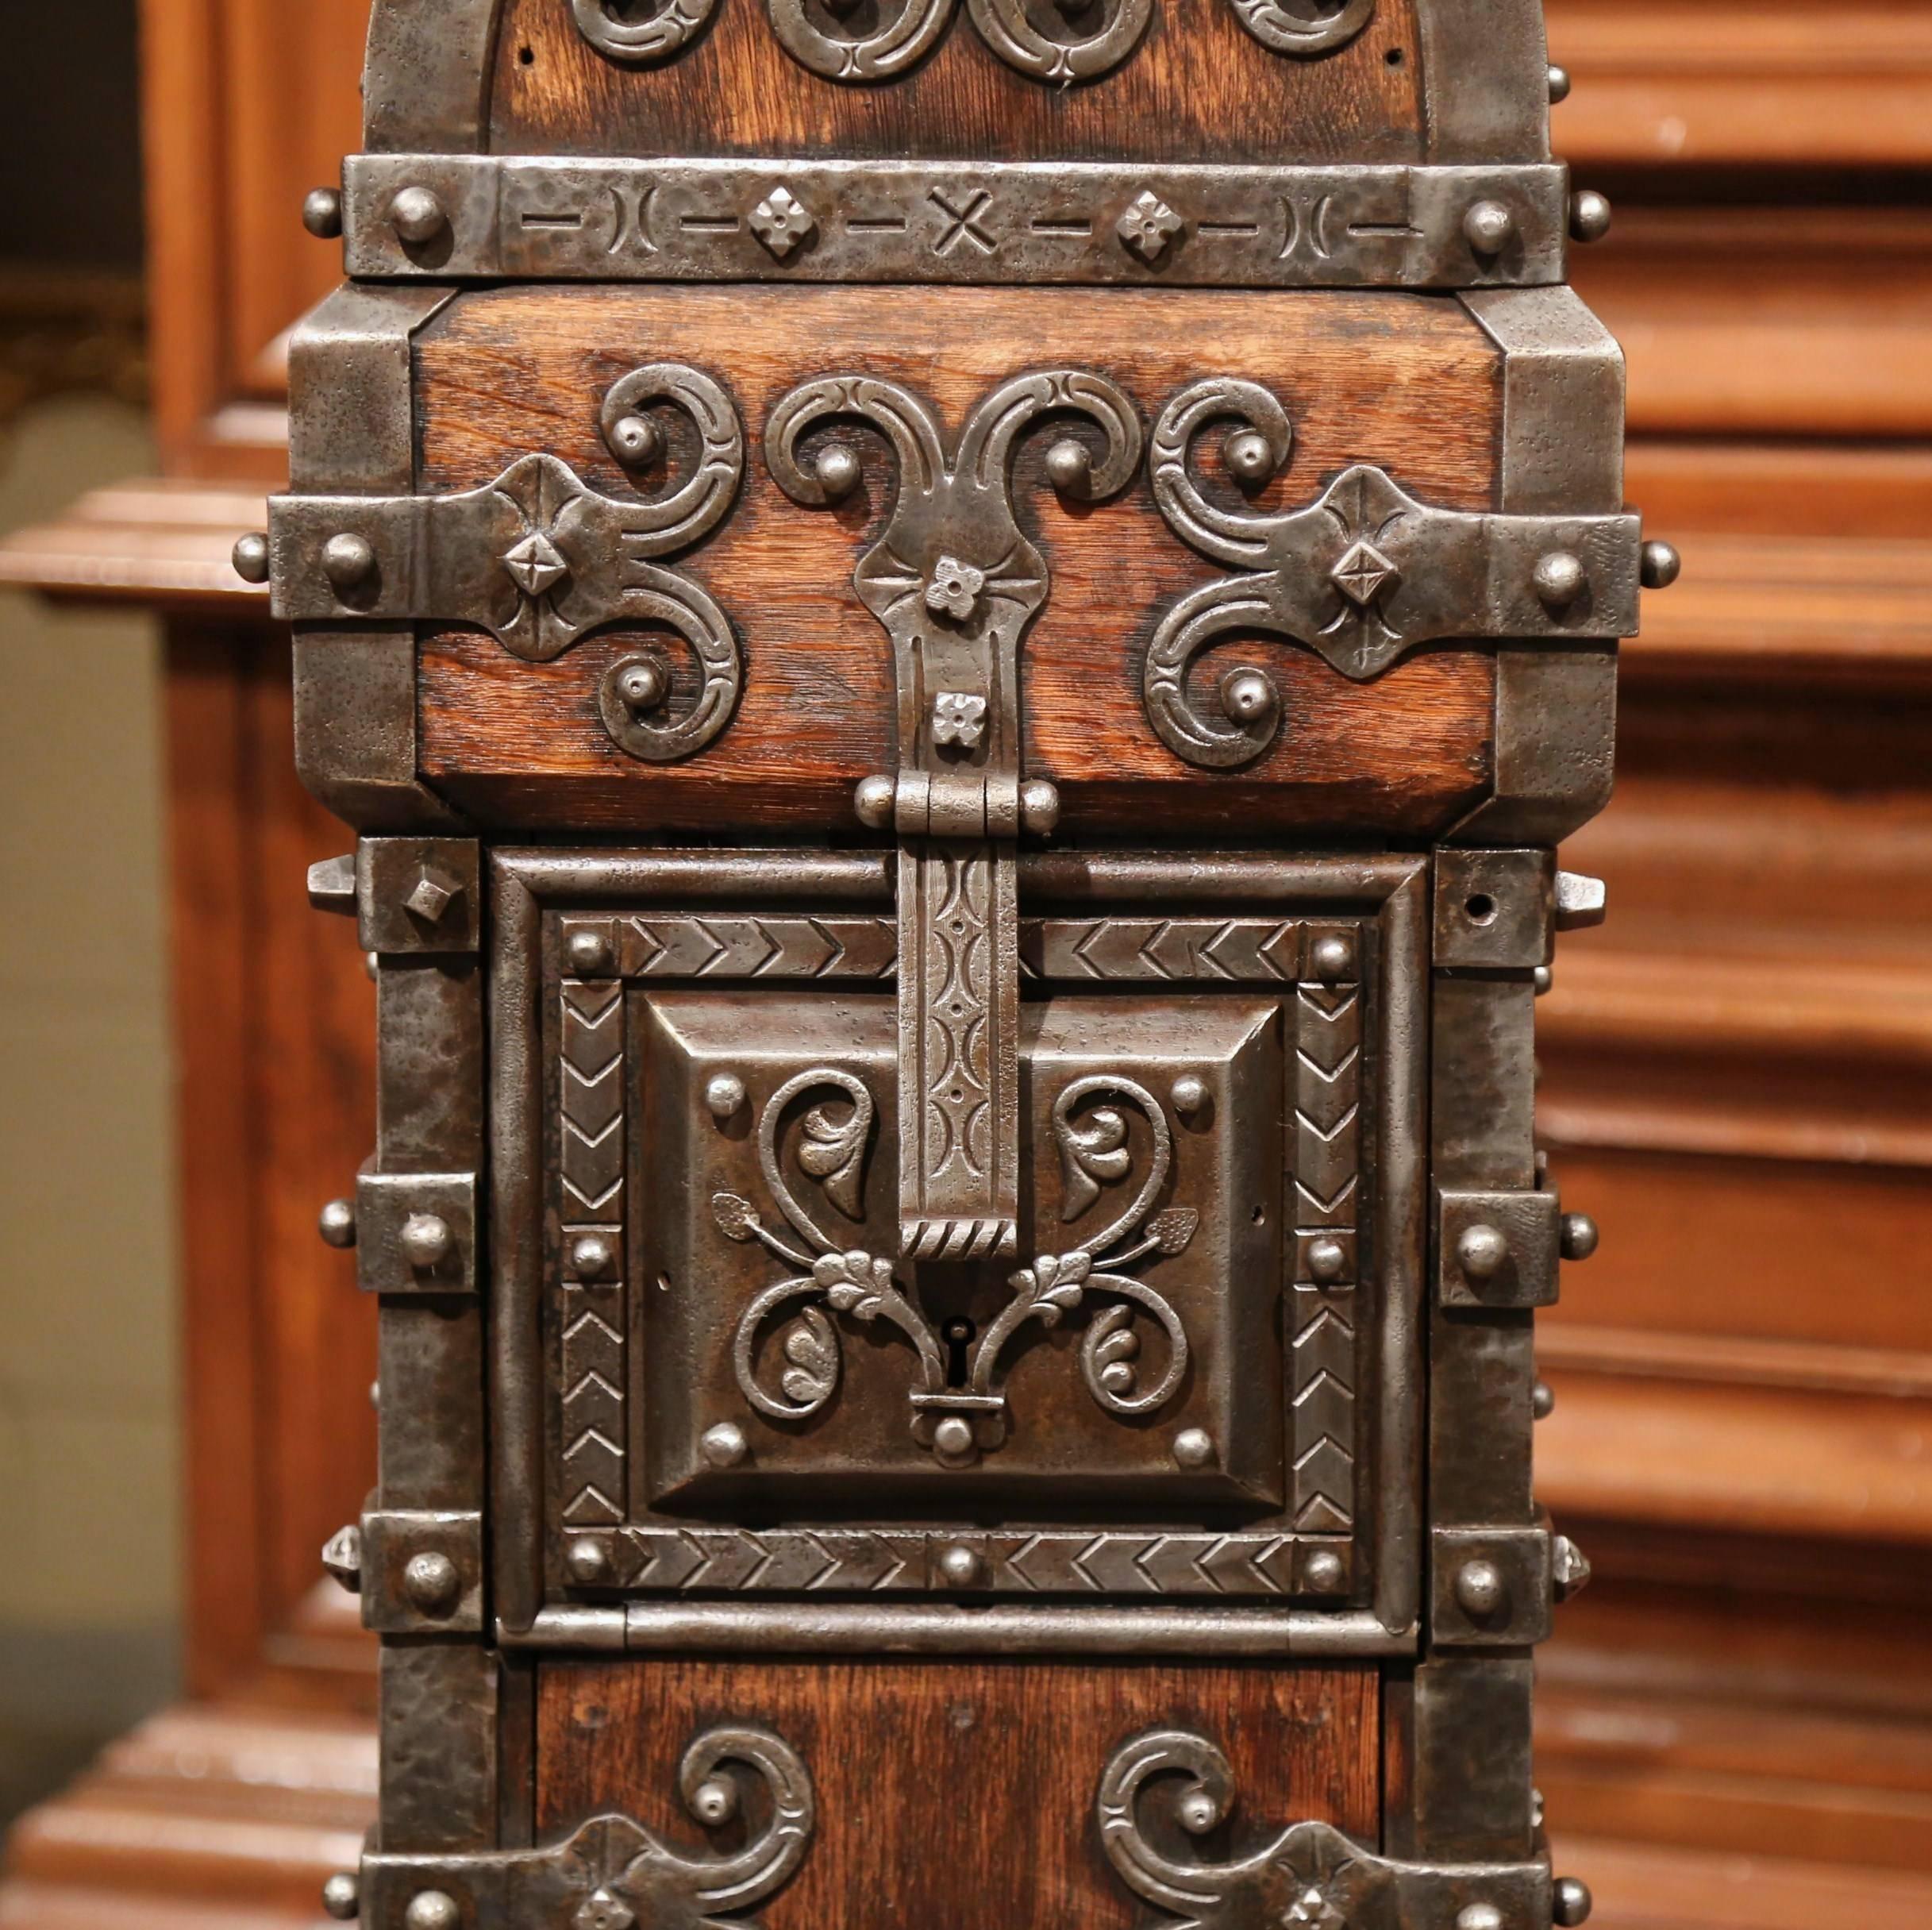 This elegant antique safe was forged and carved in Spain, circa 1750. The tall polished iron and wood church trunk features a curved top with a slot for money, and a triple lock with two keys, which allows you to access the inside removable metal